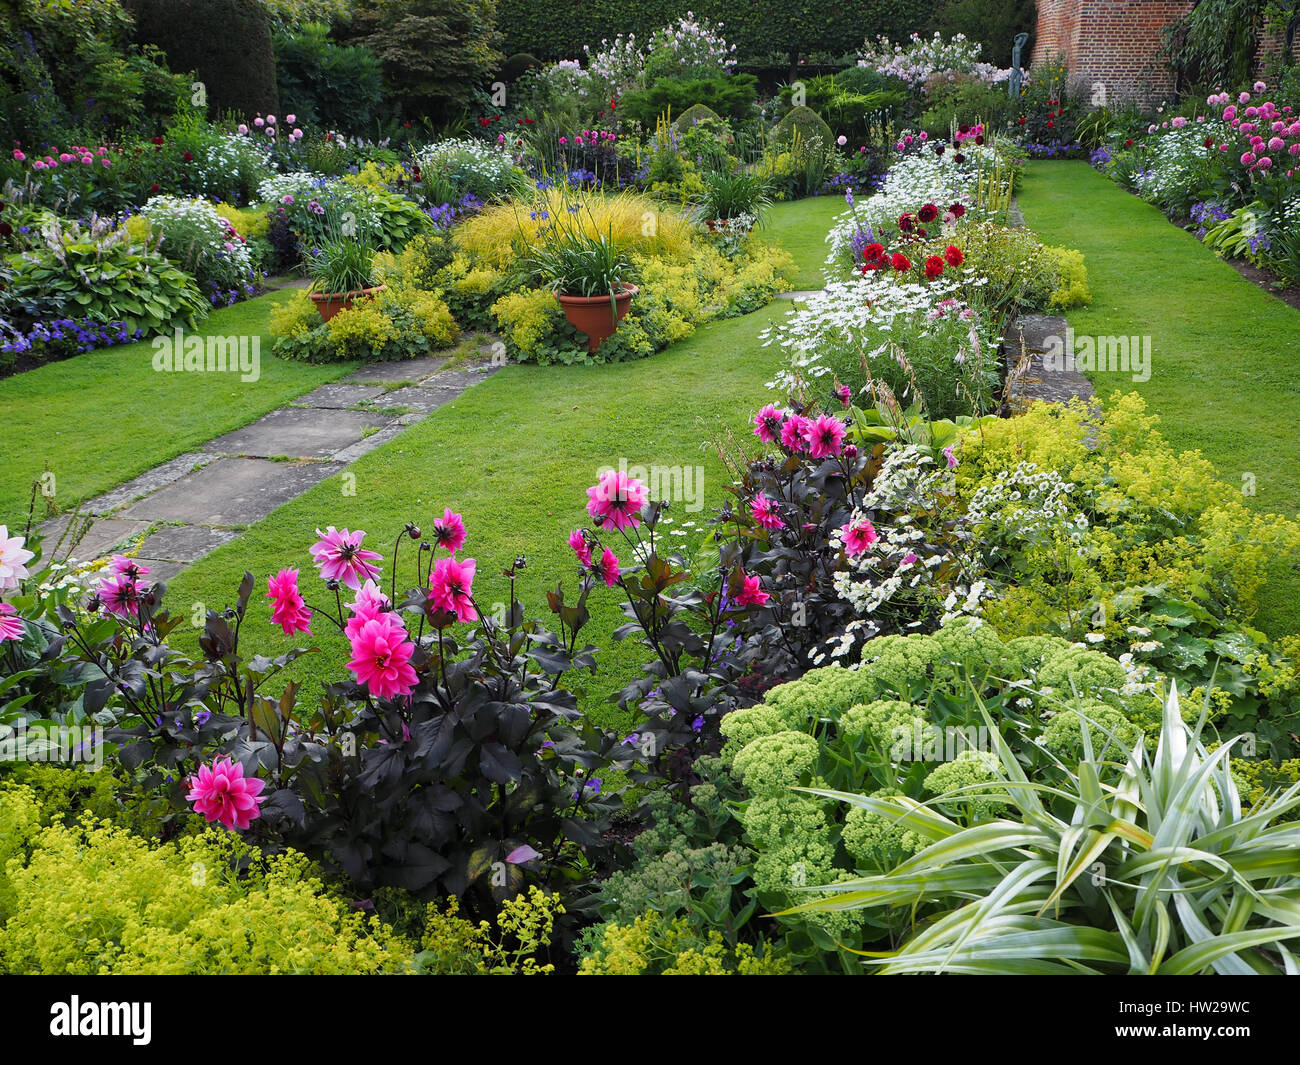 Chenies Manor Sunken garden in late July with lawn, path and vibrantly coloured pink dahlias, shades of green foliage and ornamental pond facing west. Stock Photo